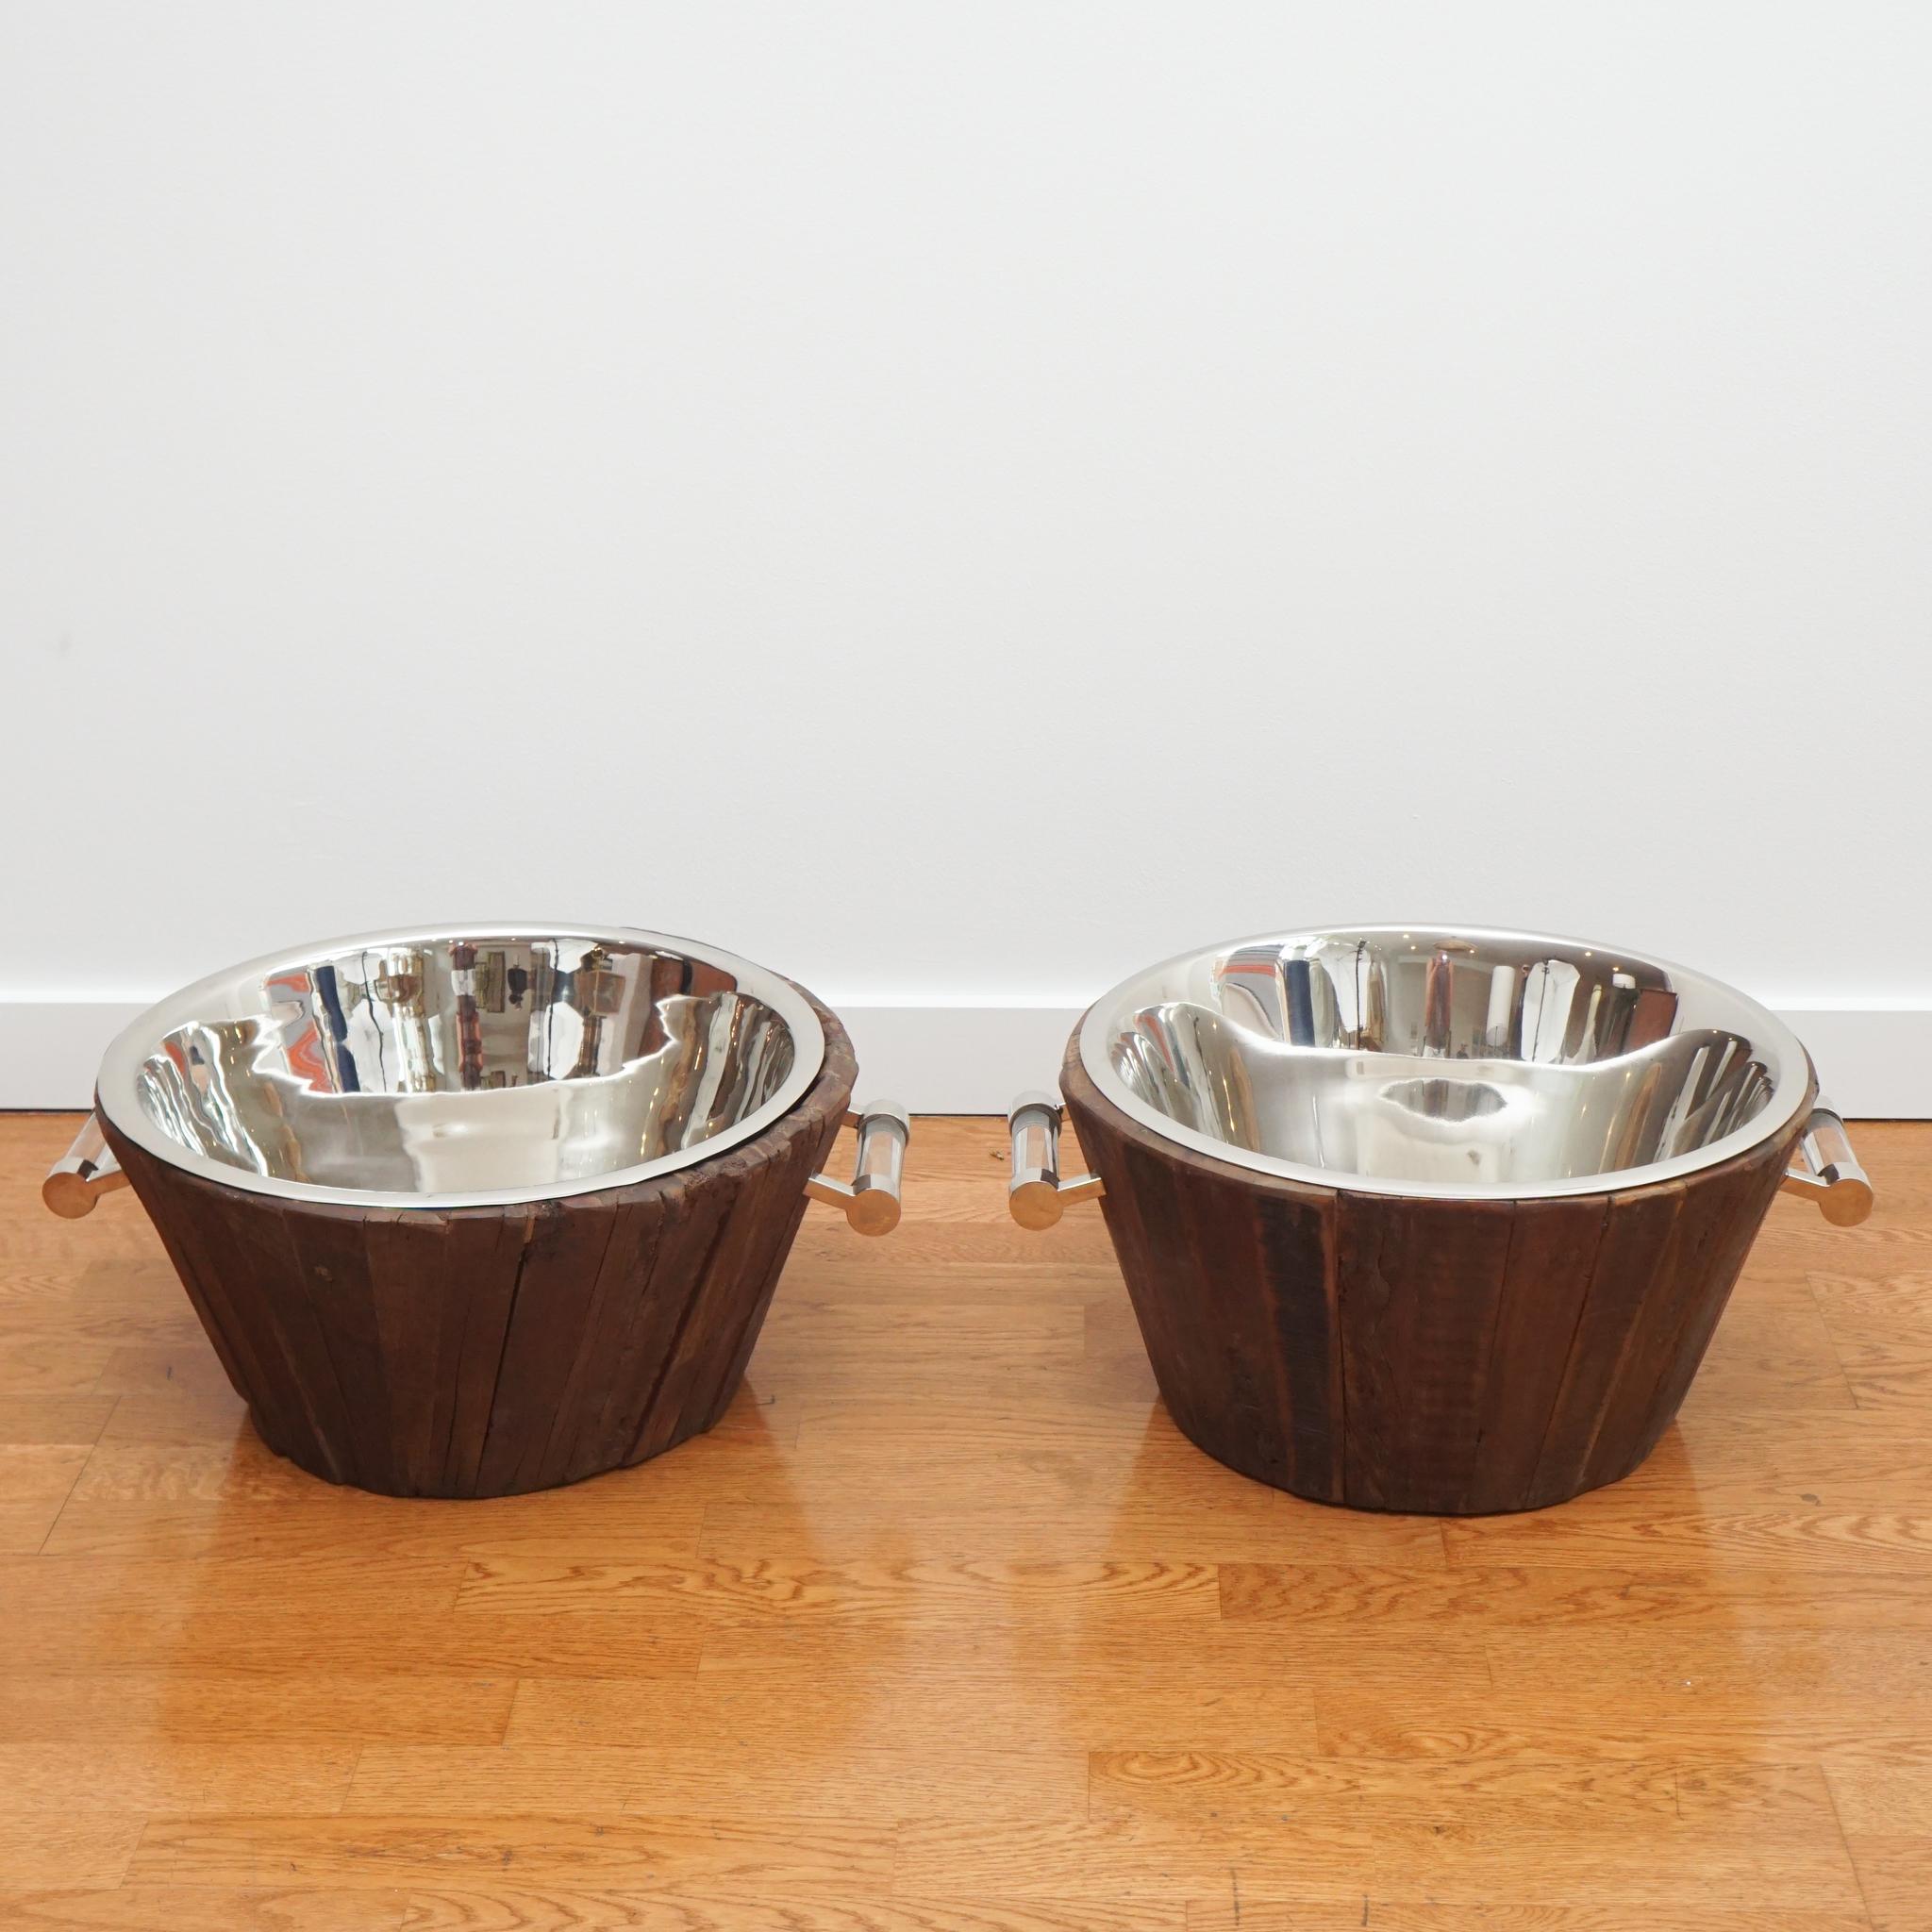 Teak Planters with Metal Inserts In Good Condition For Sale In Hudson, NY